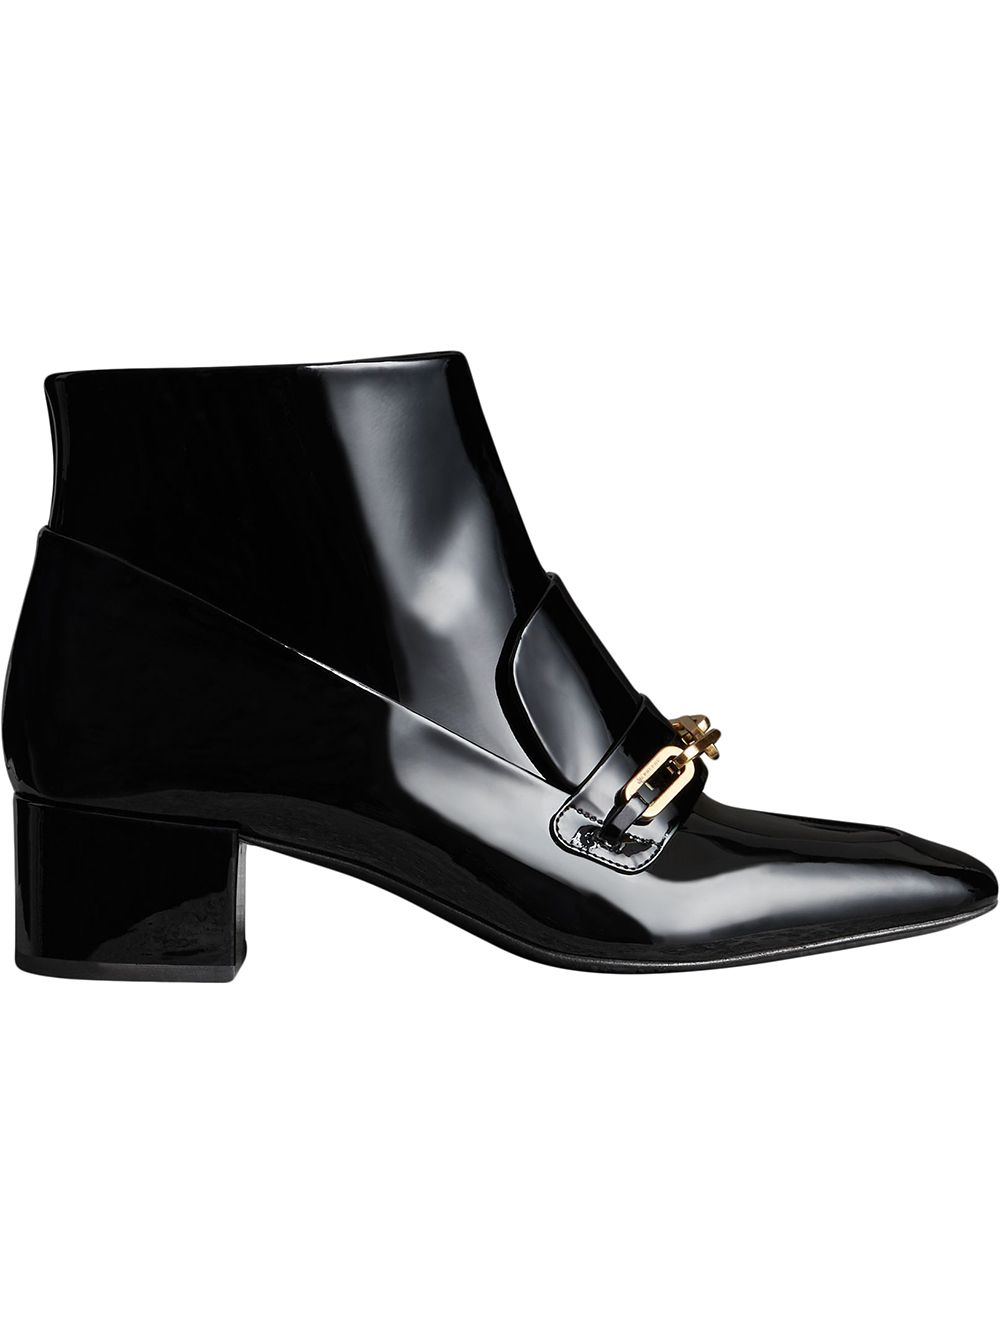 Glossy Finish: Burberry Link Detail Patent Leather Ankle Boots